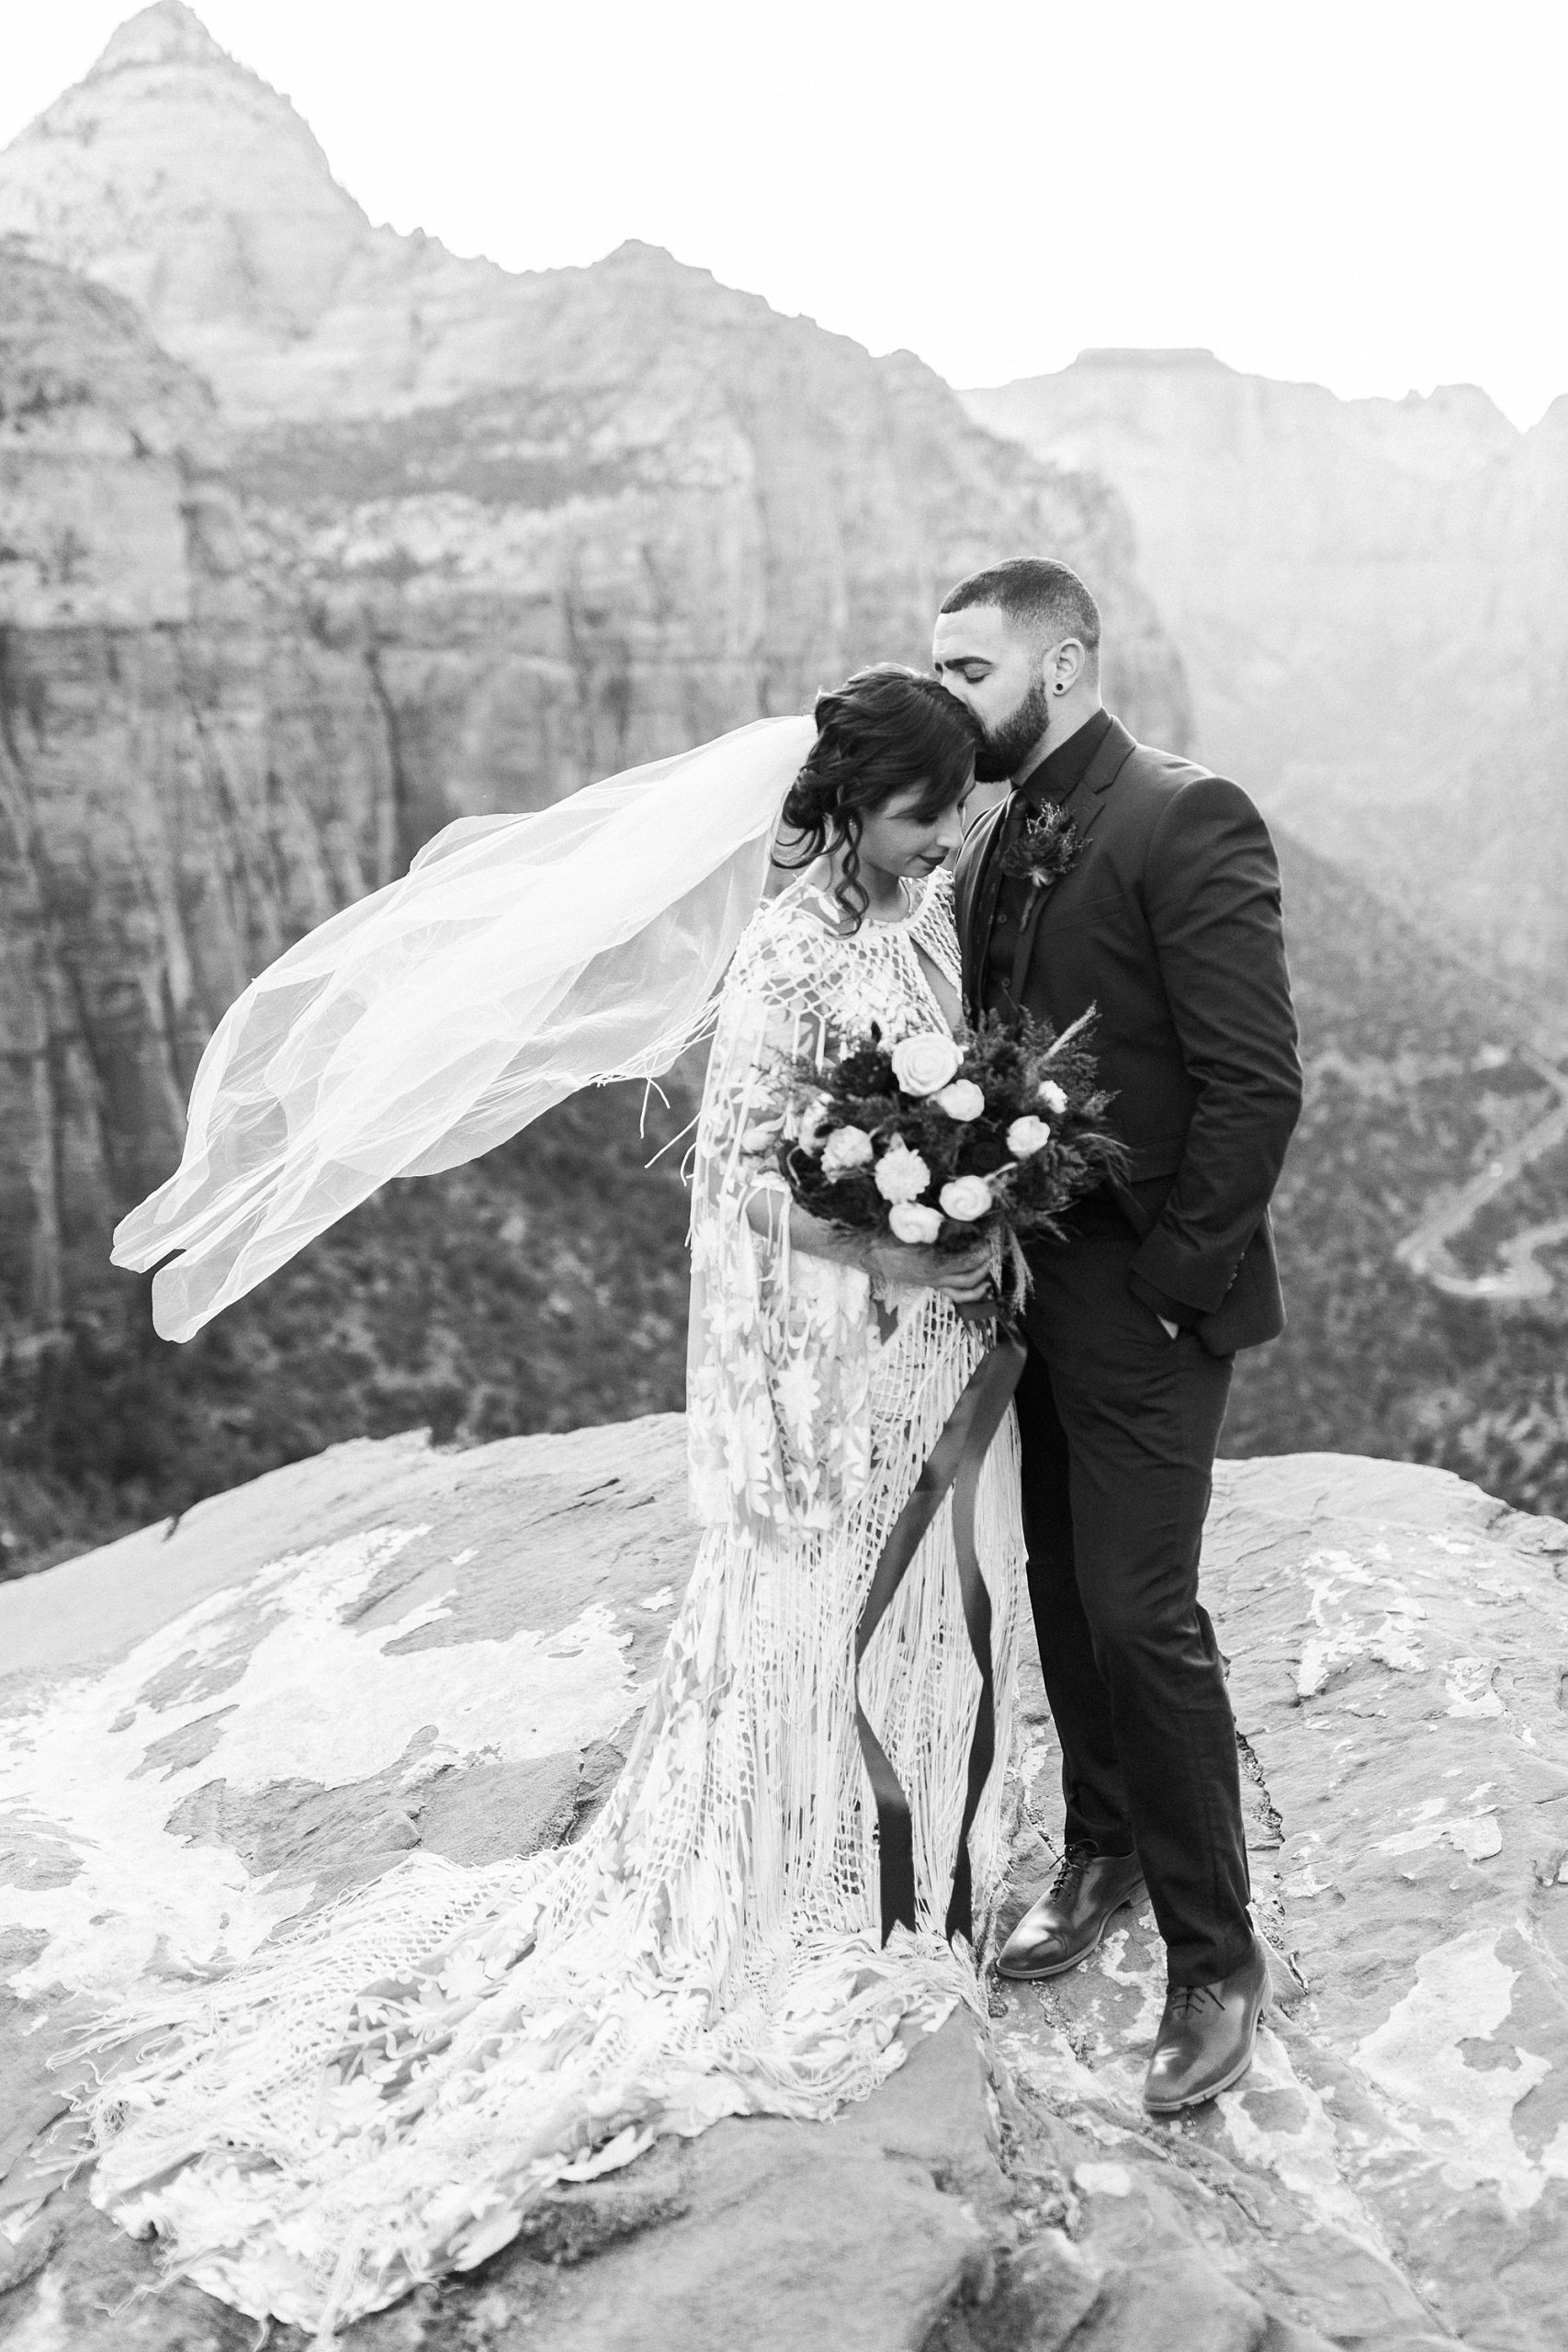 sunset elopement in zion national park